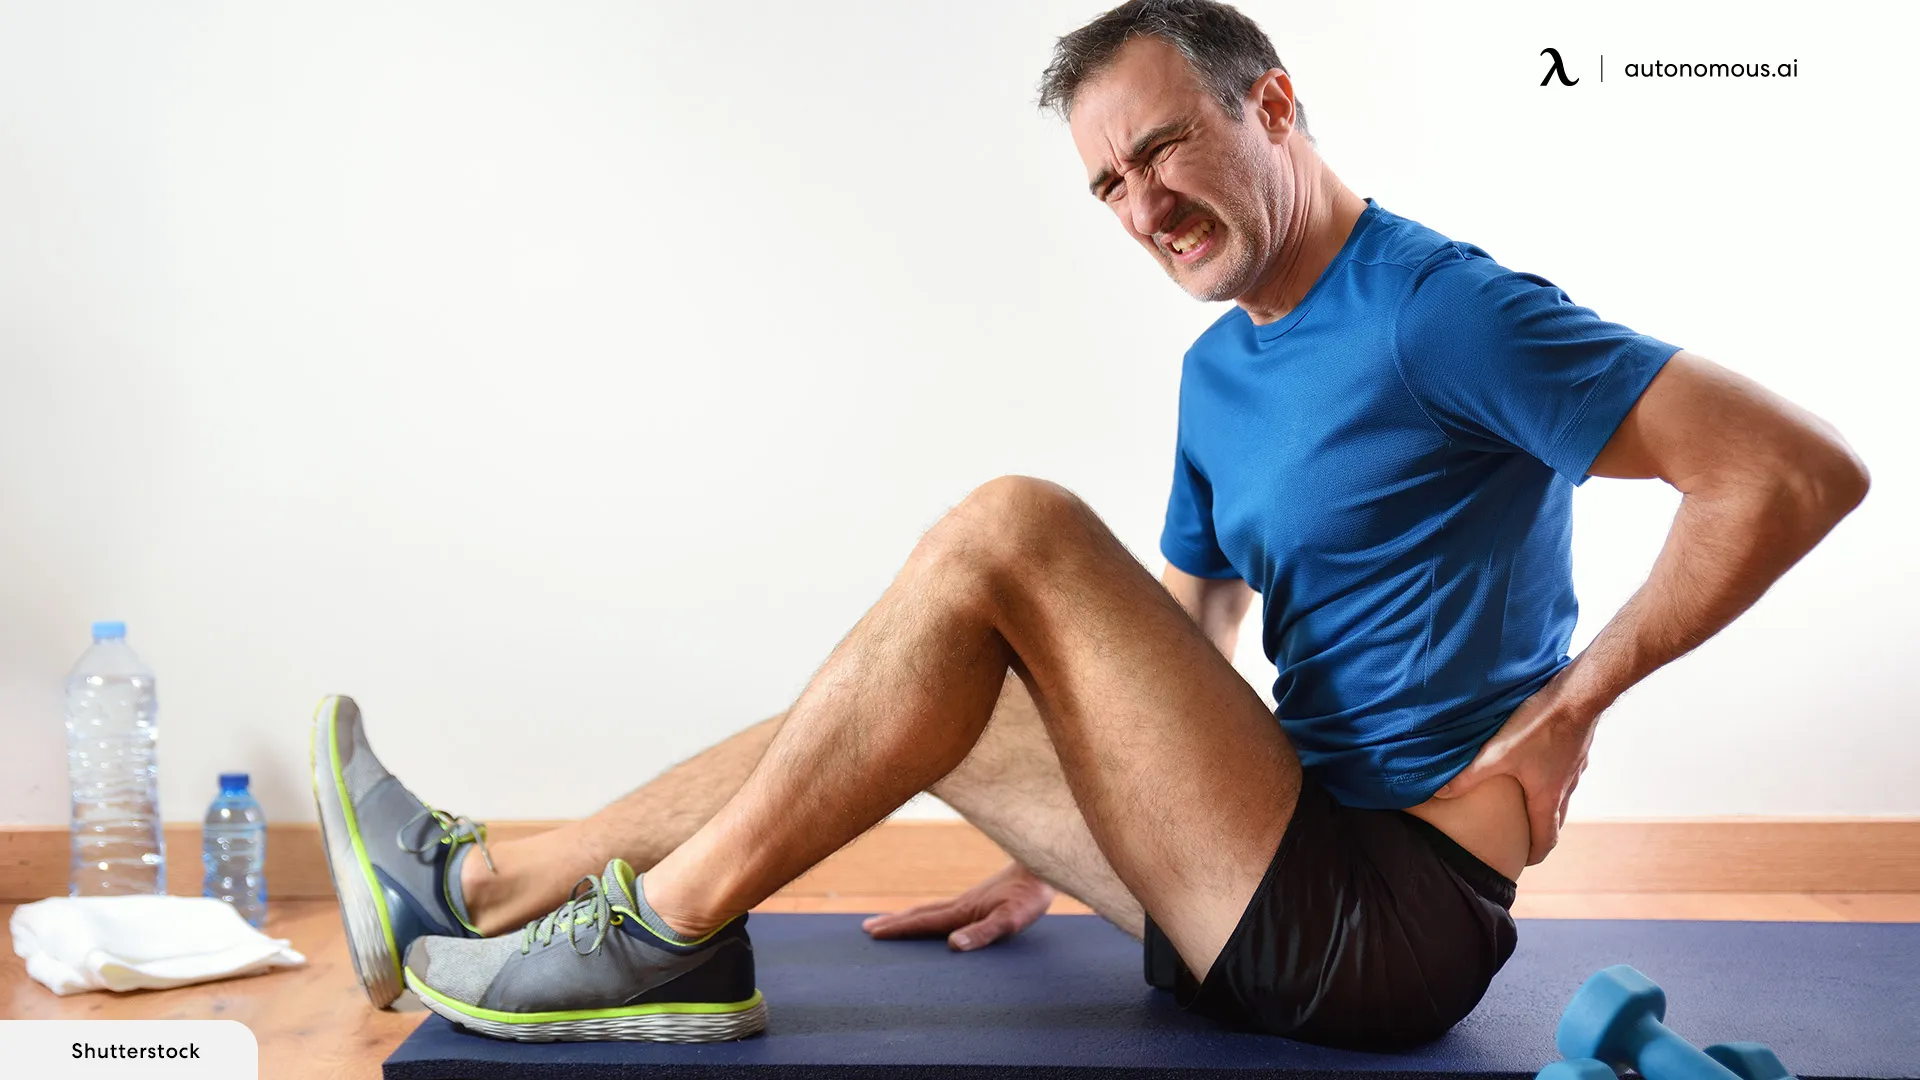 Fitness - Lower back pain when sitting